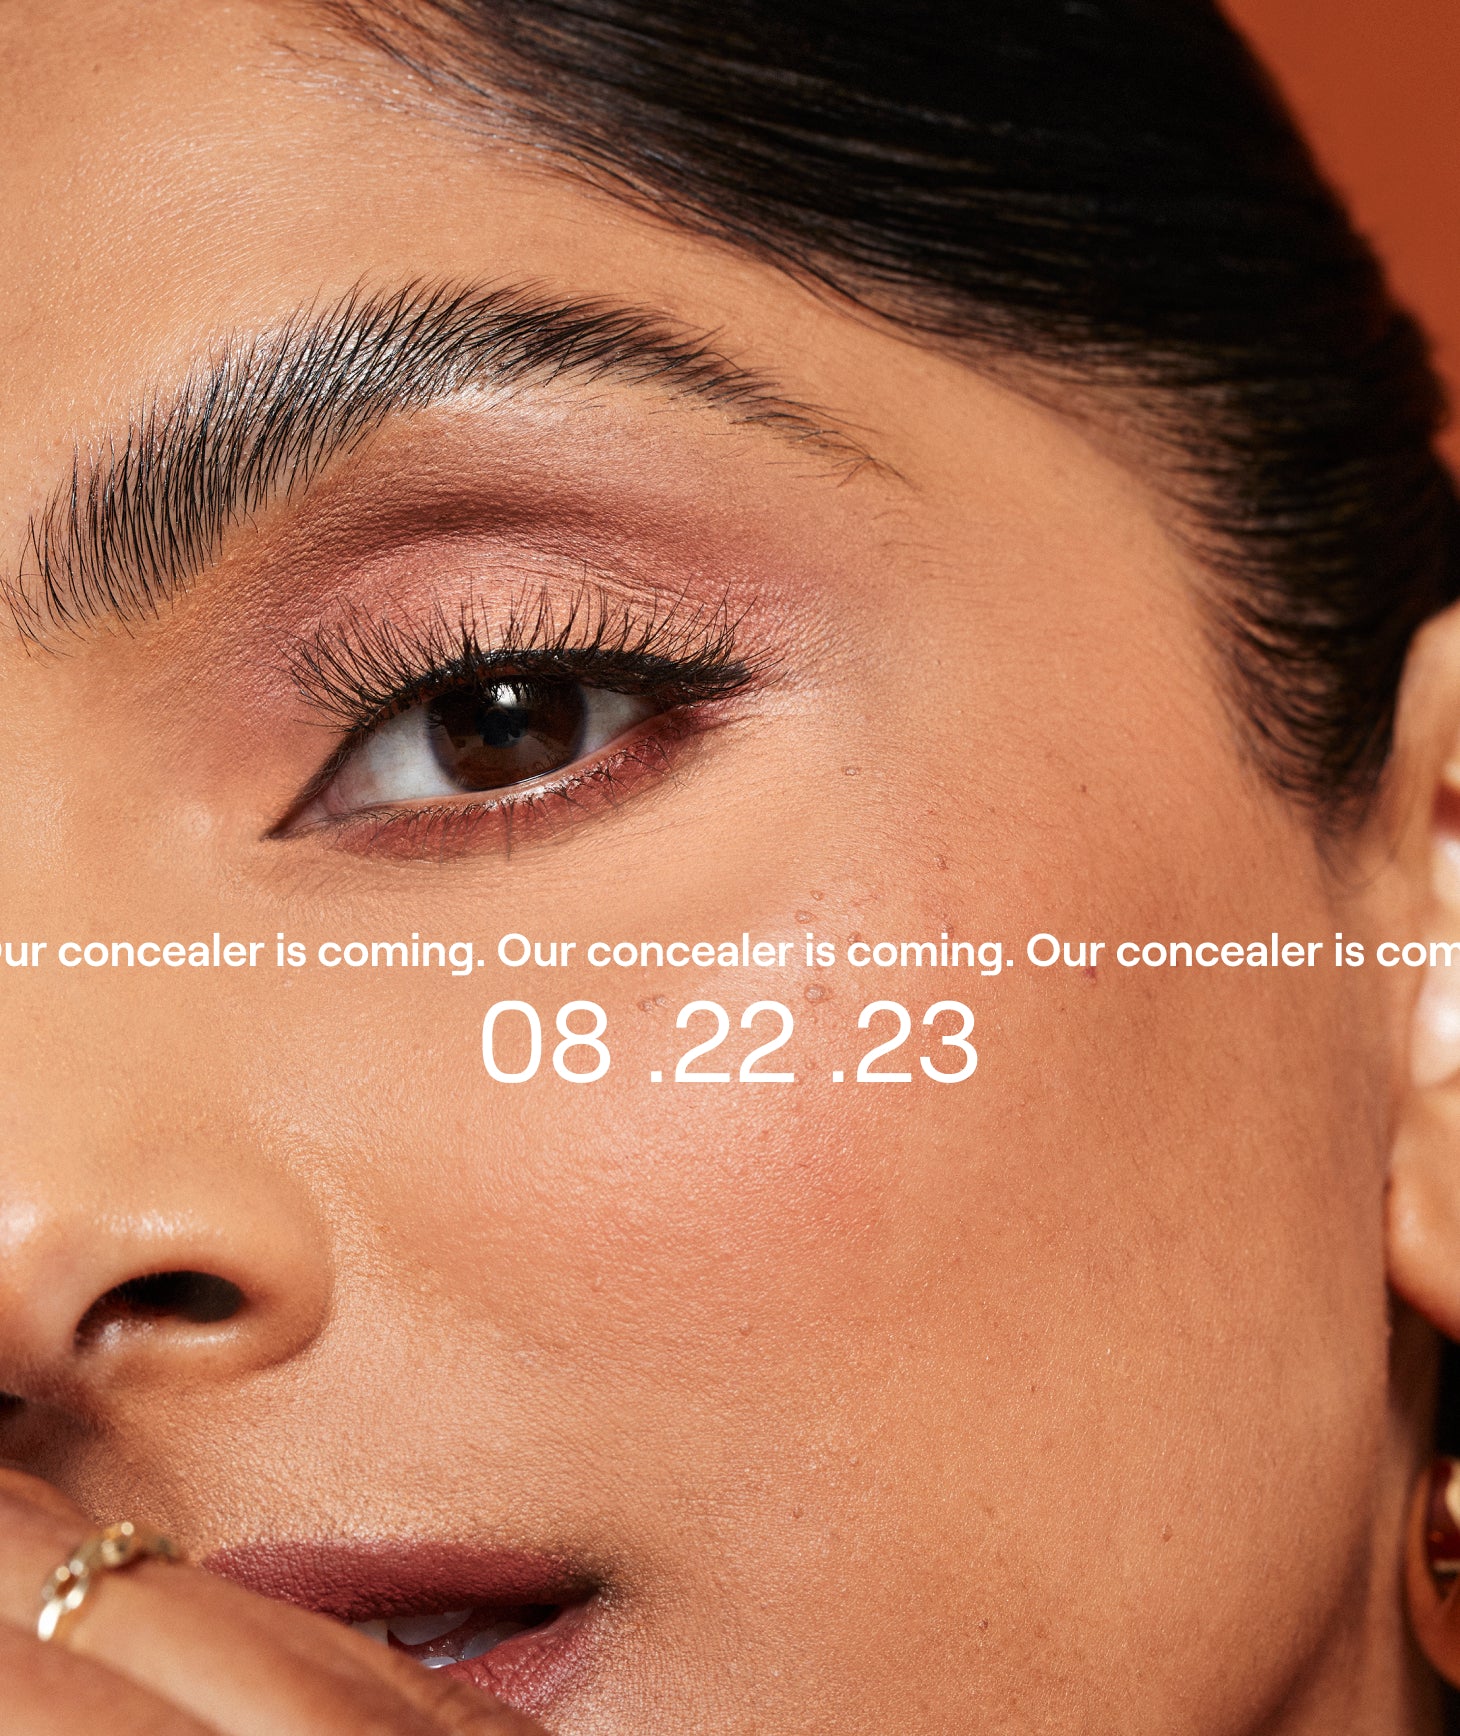 Our concealer is coming (finally)